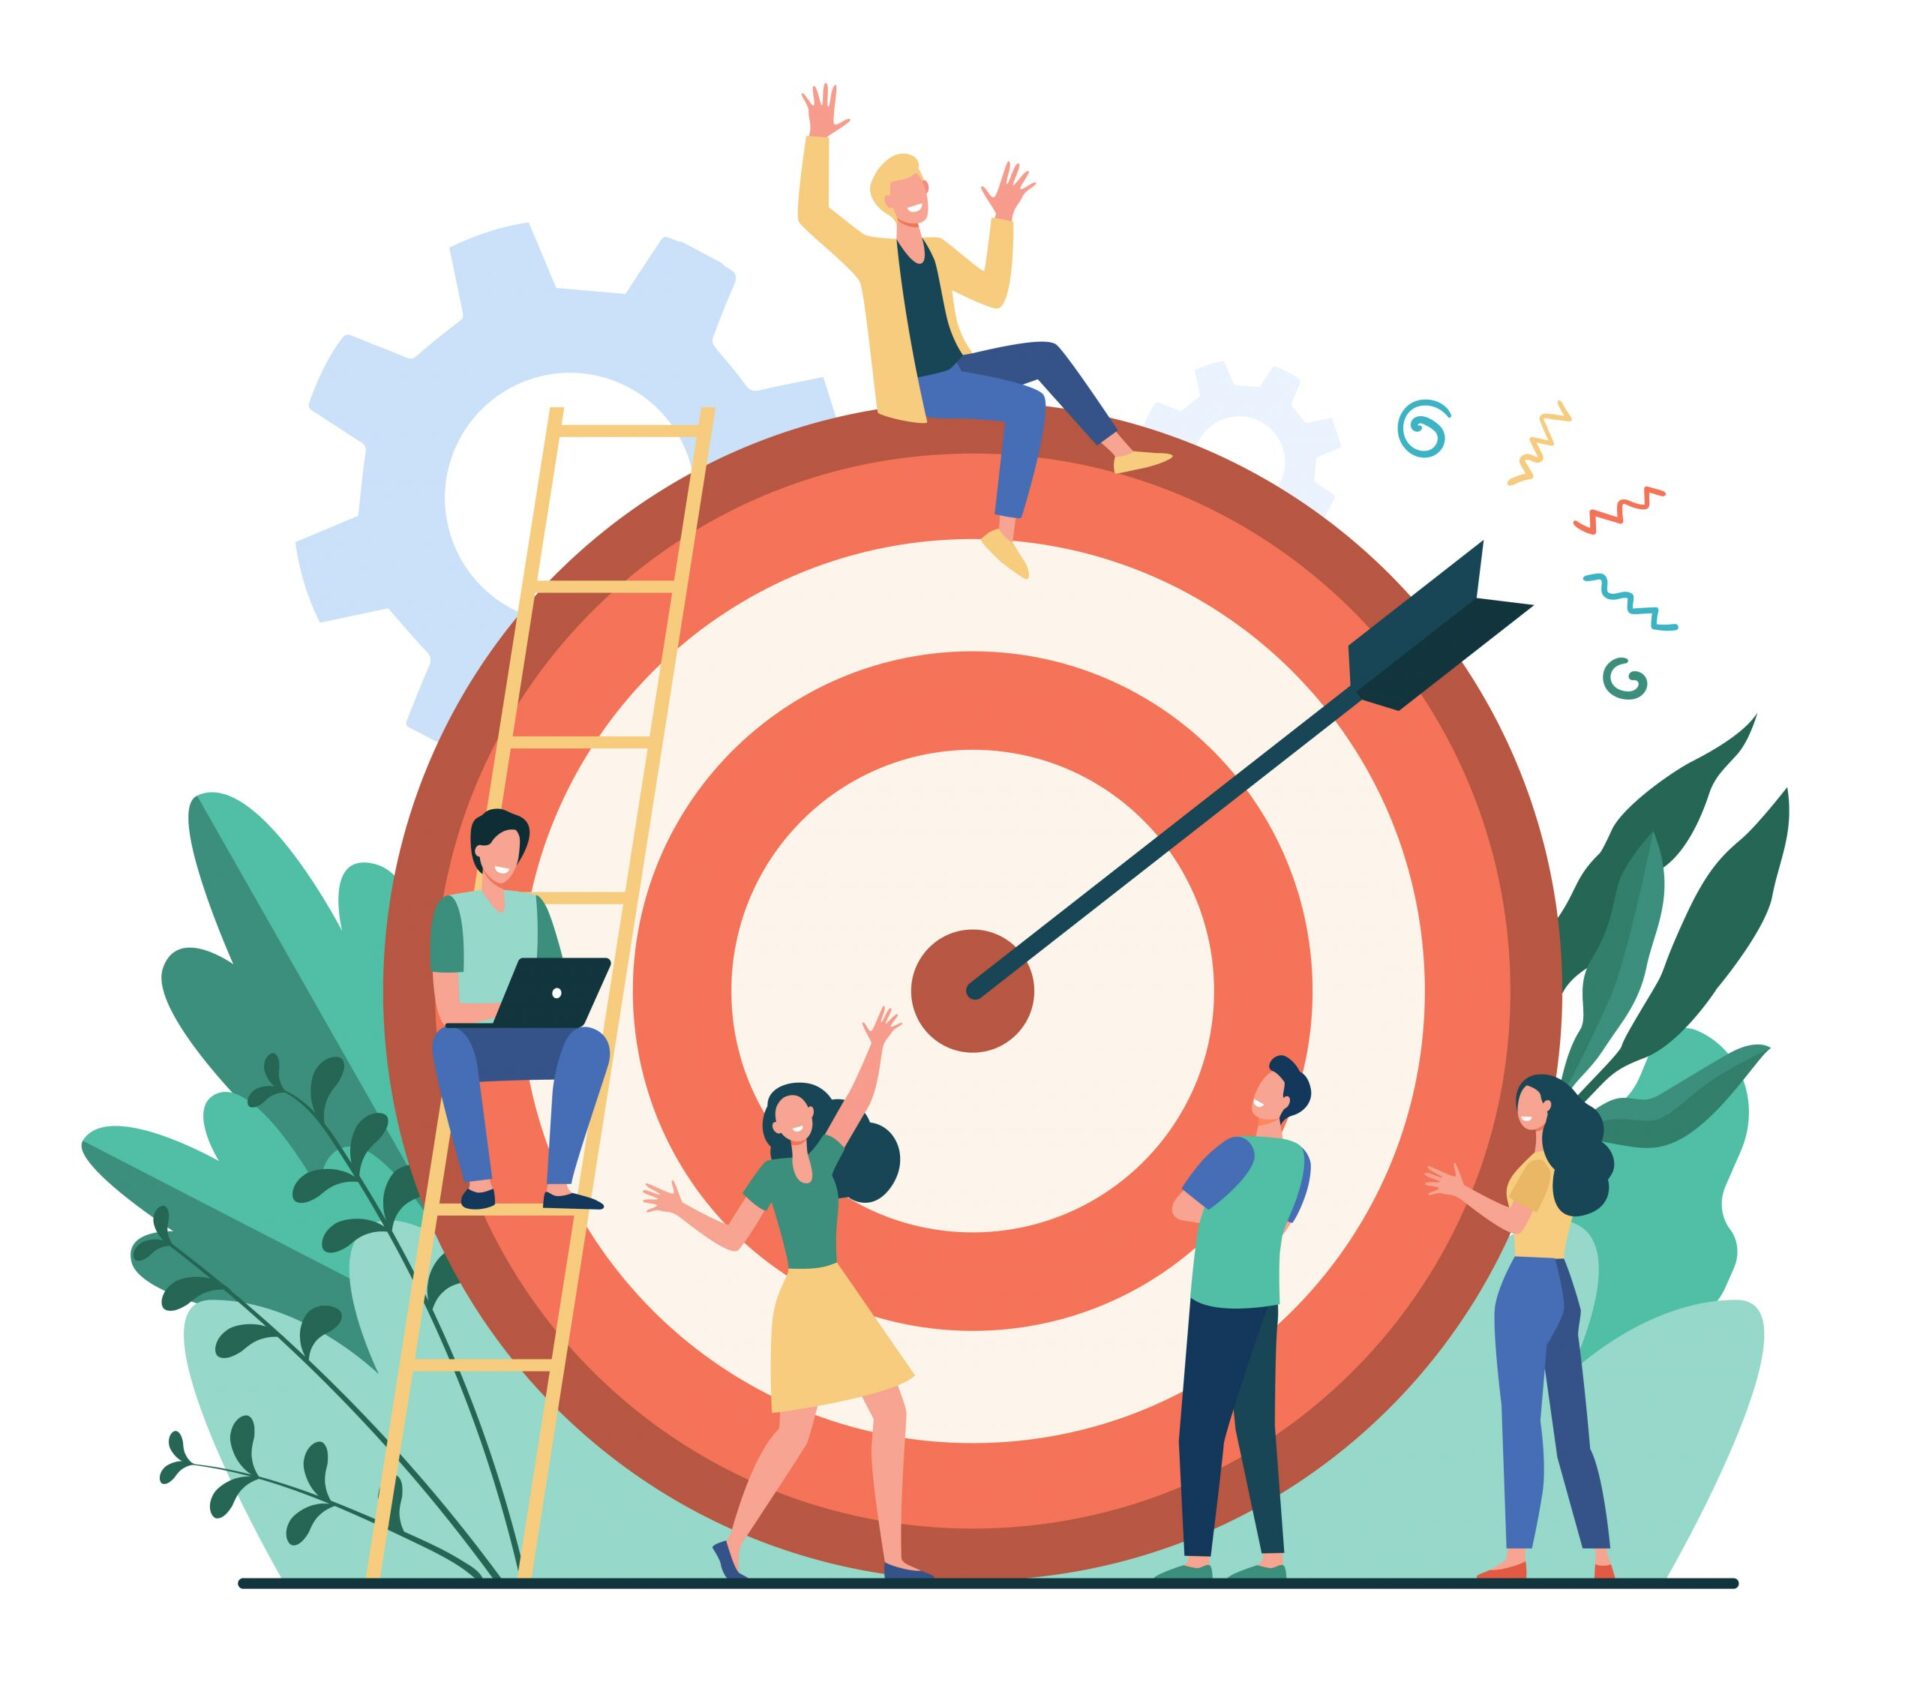 A lively illustration featuring a large target with an arrow hitting the bullseye, symbolizing goal achievement. Surrounding the target are five people celebrating their success.